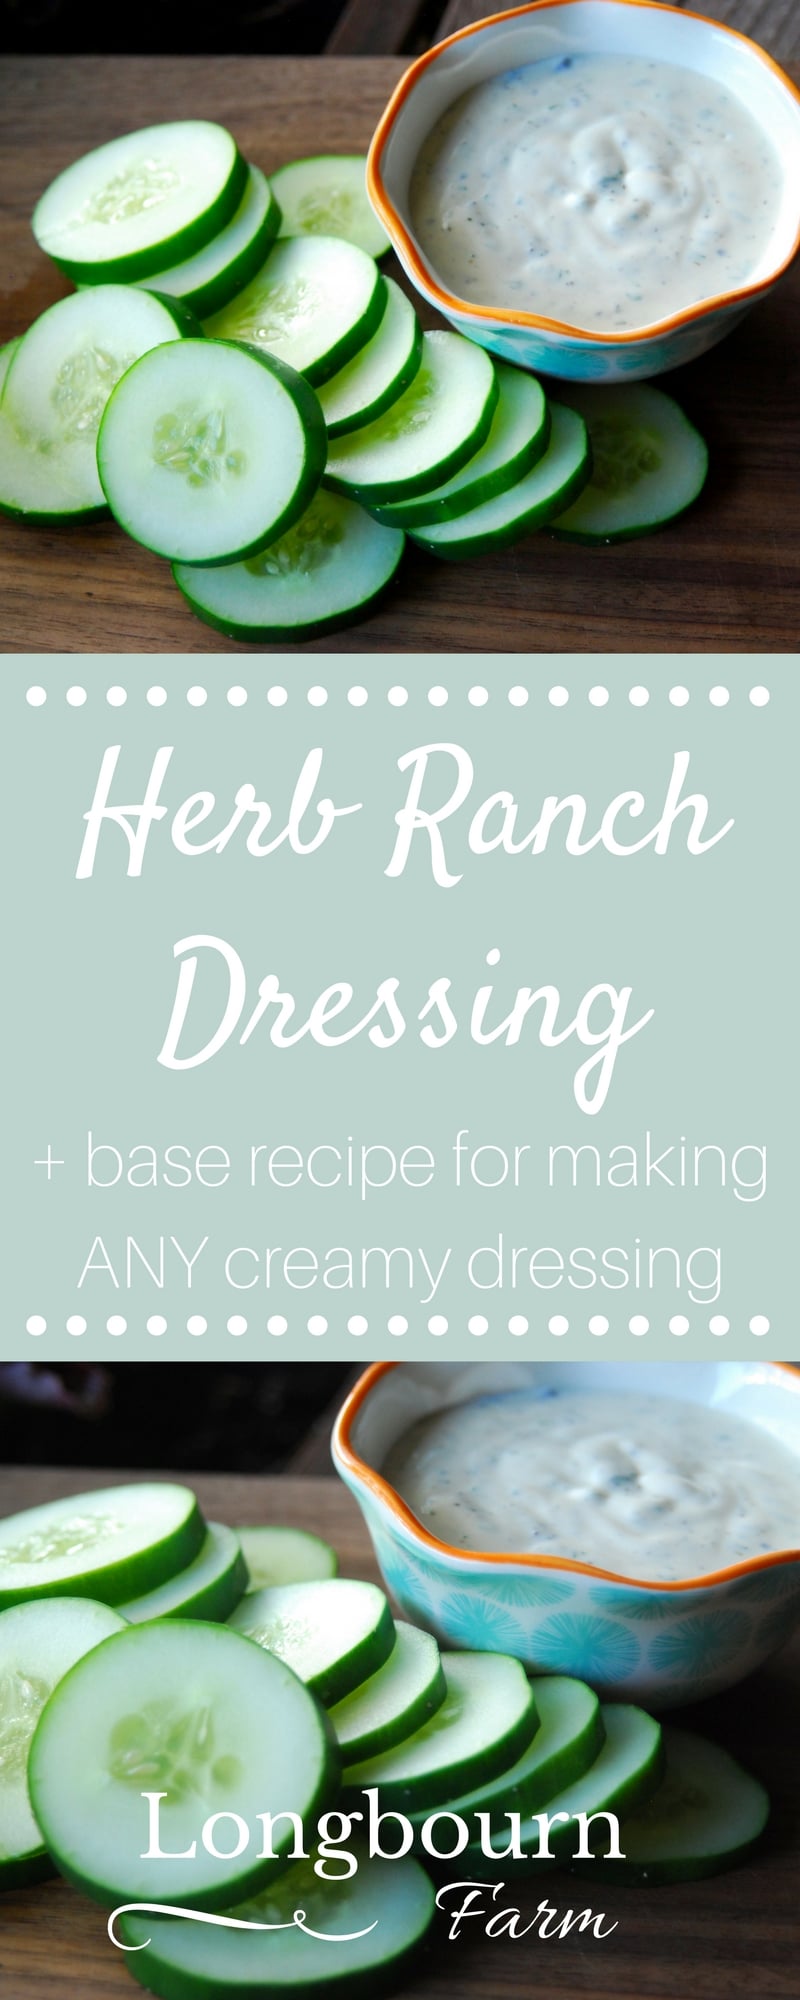 Homemade Ranch Dressing is so easy to throw together and tastes amazing! Customize it to your preference for a perfect dip or salad every time.